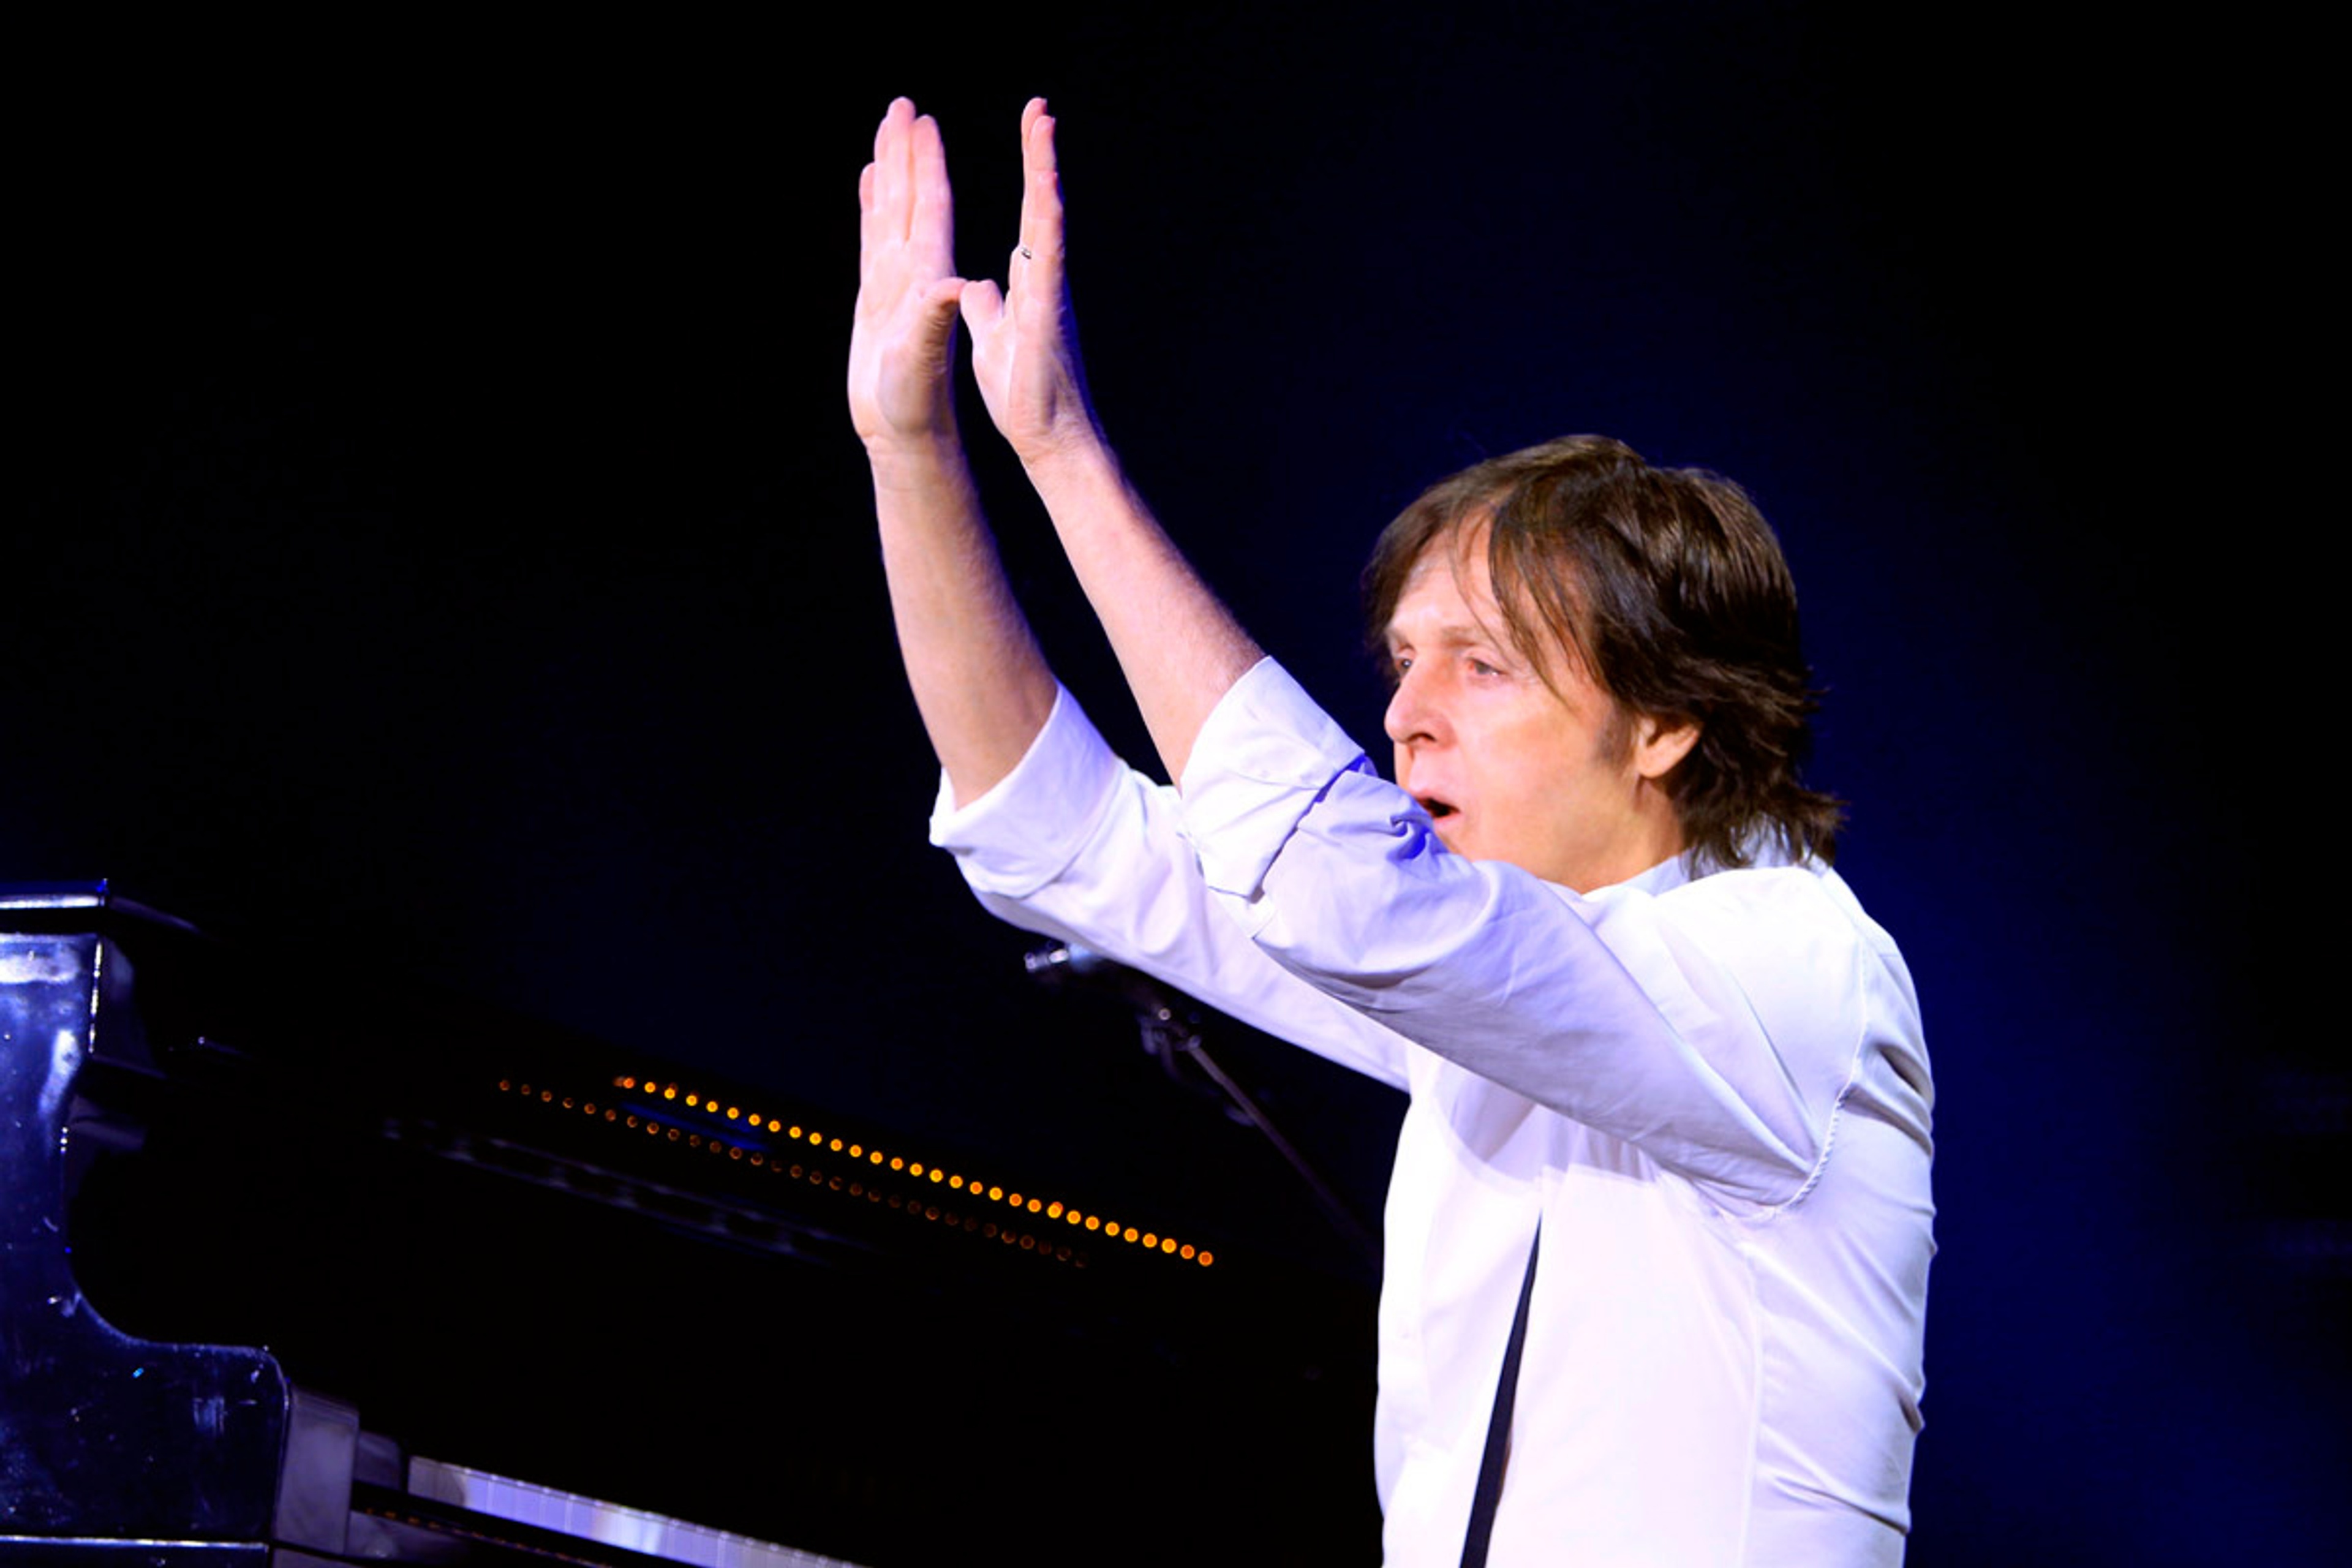 Paul at his piano on stage, Minute Maid Park, Houston, 14th November 2012